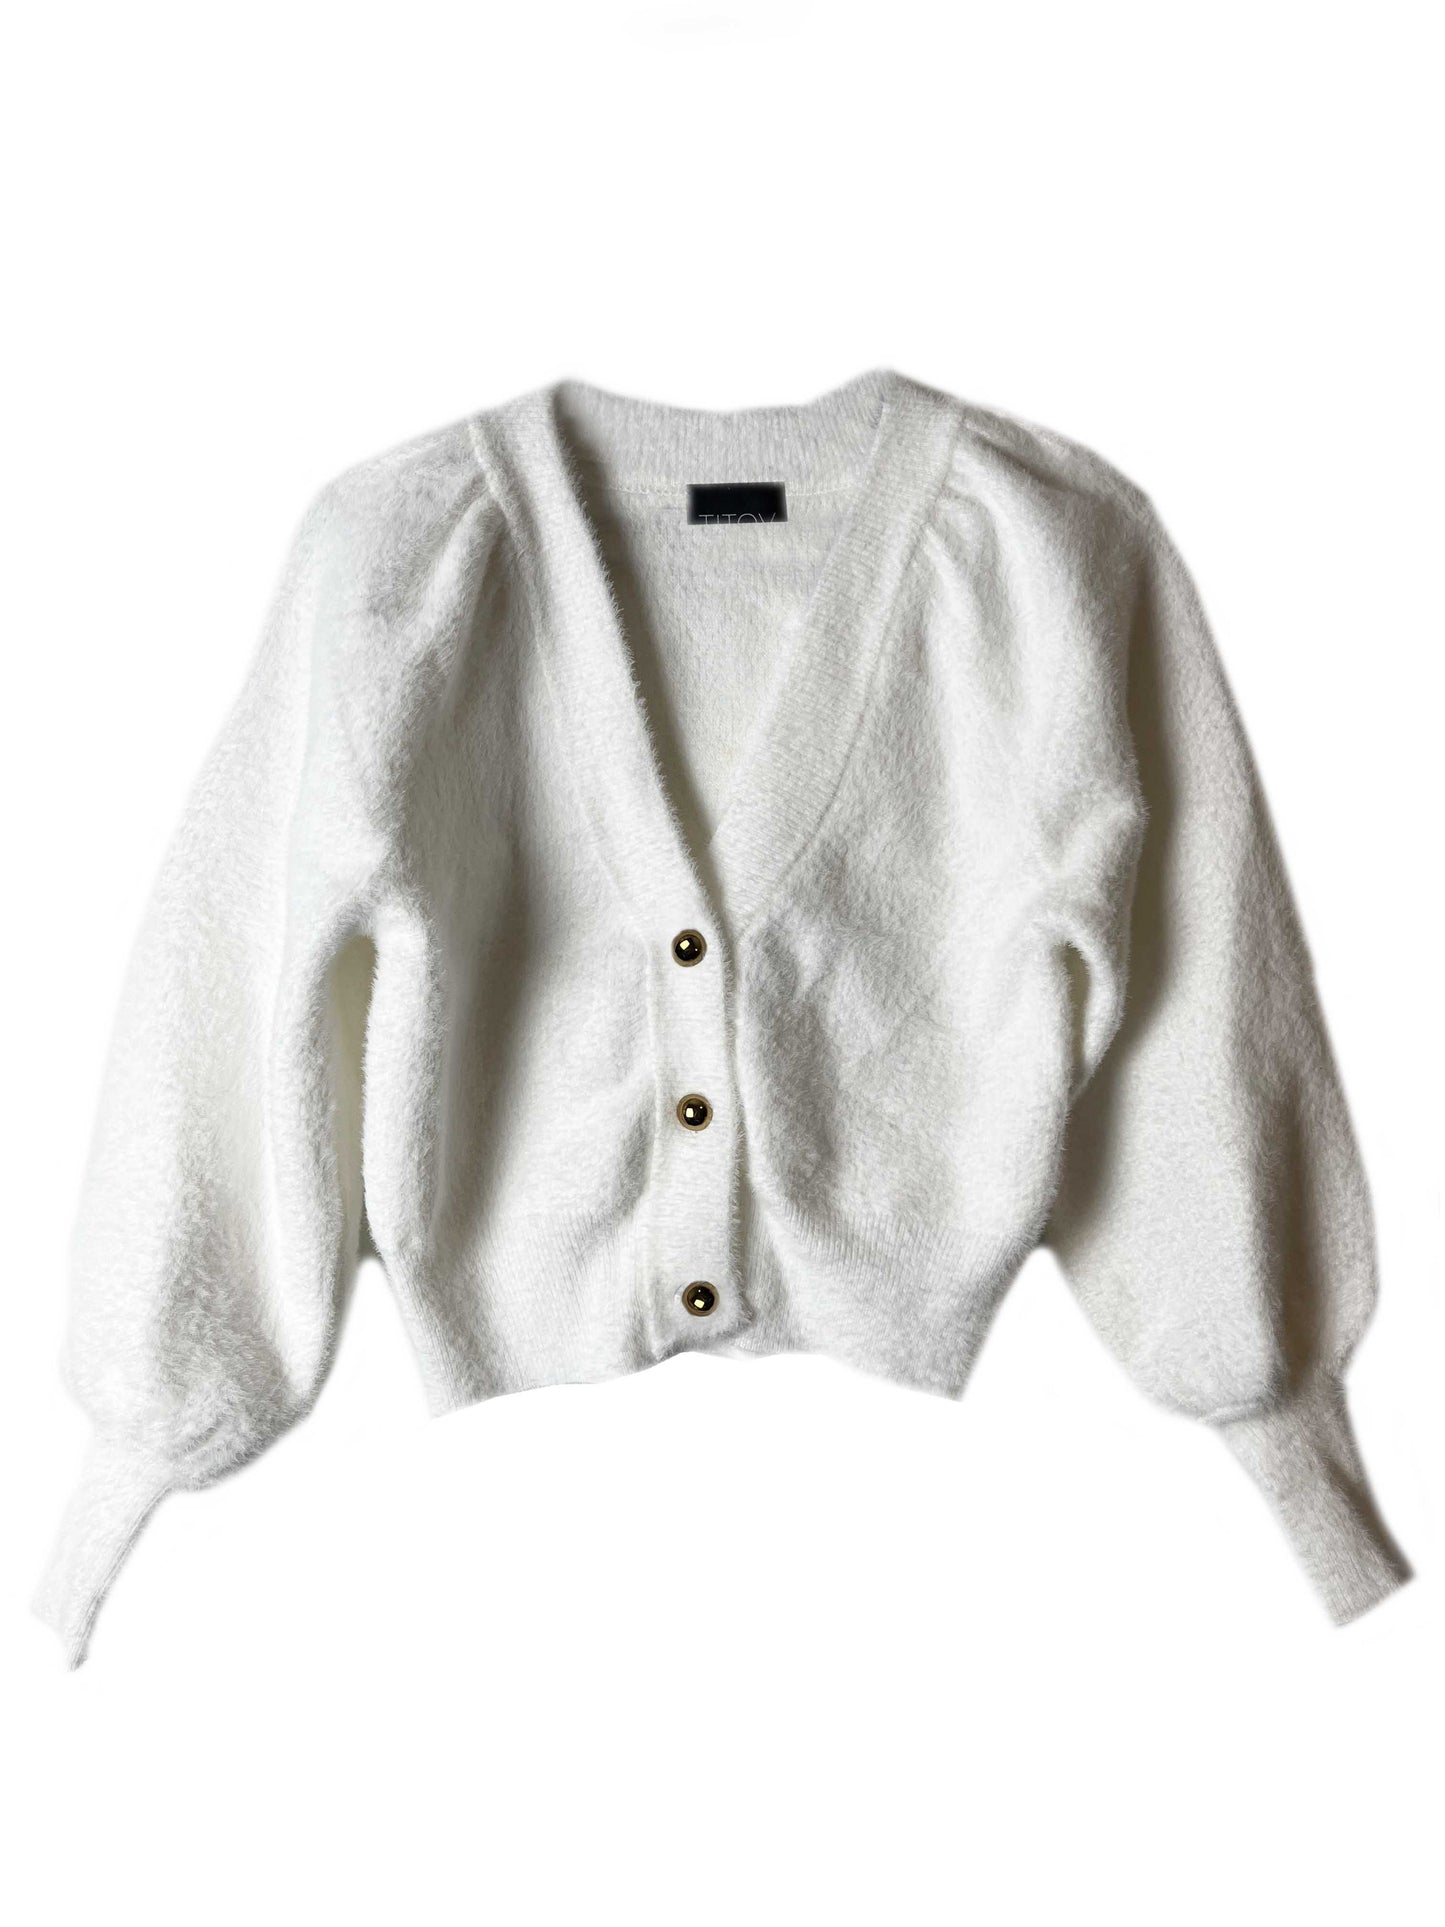 Fuzzy Cropped Sweater - White